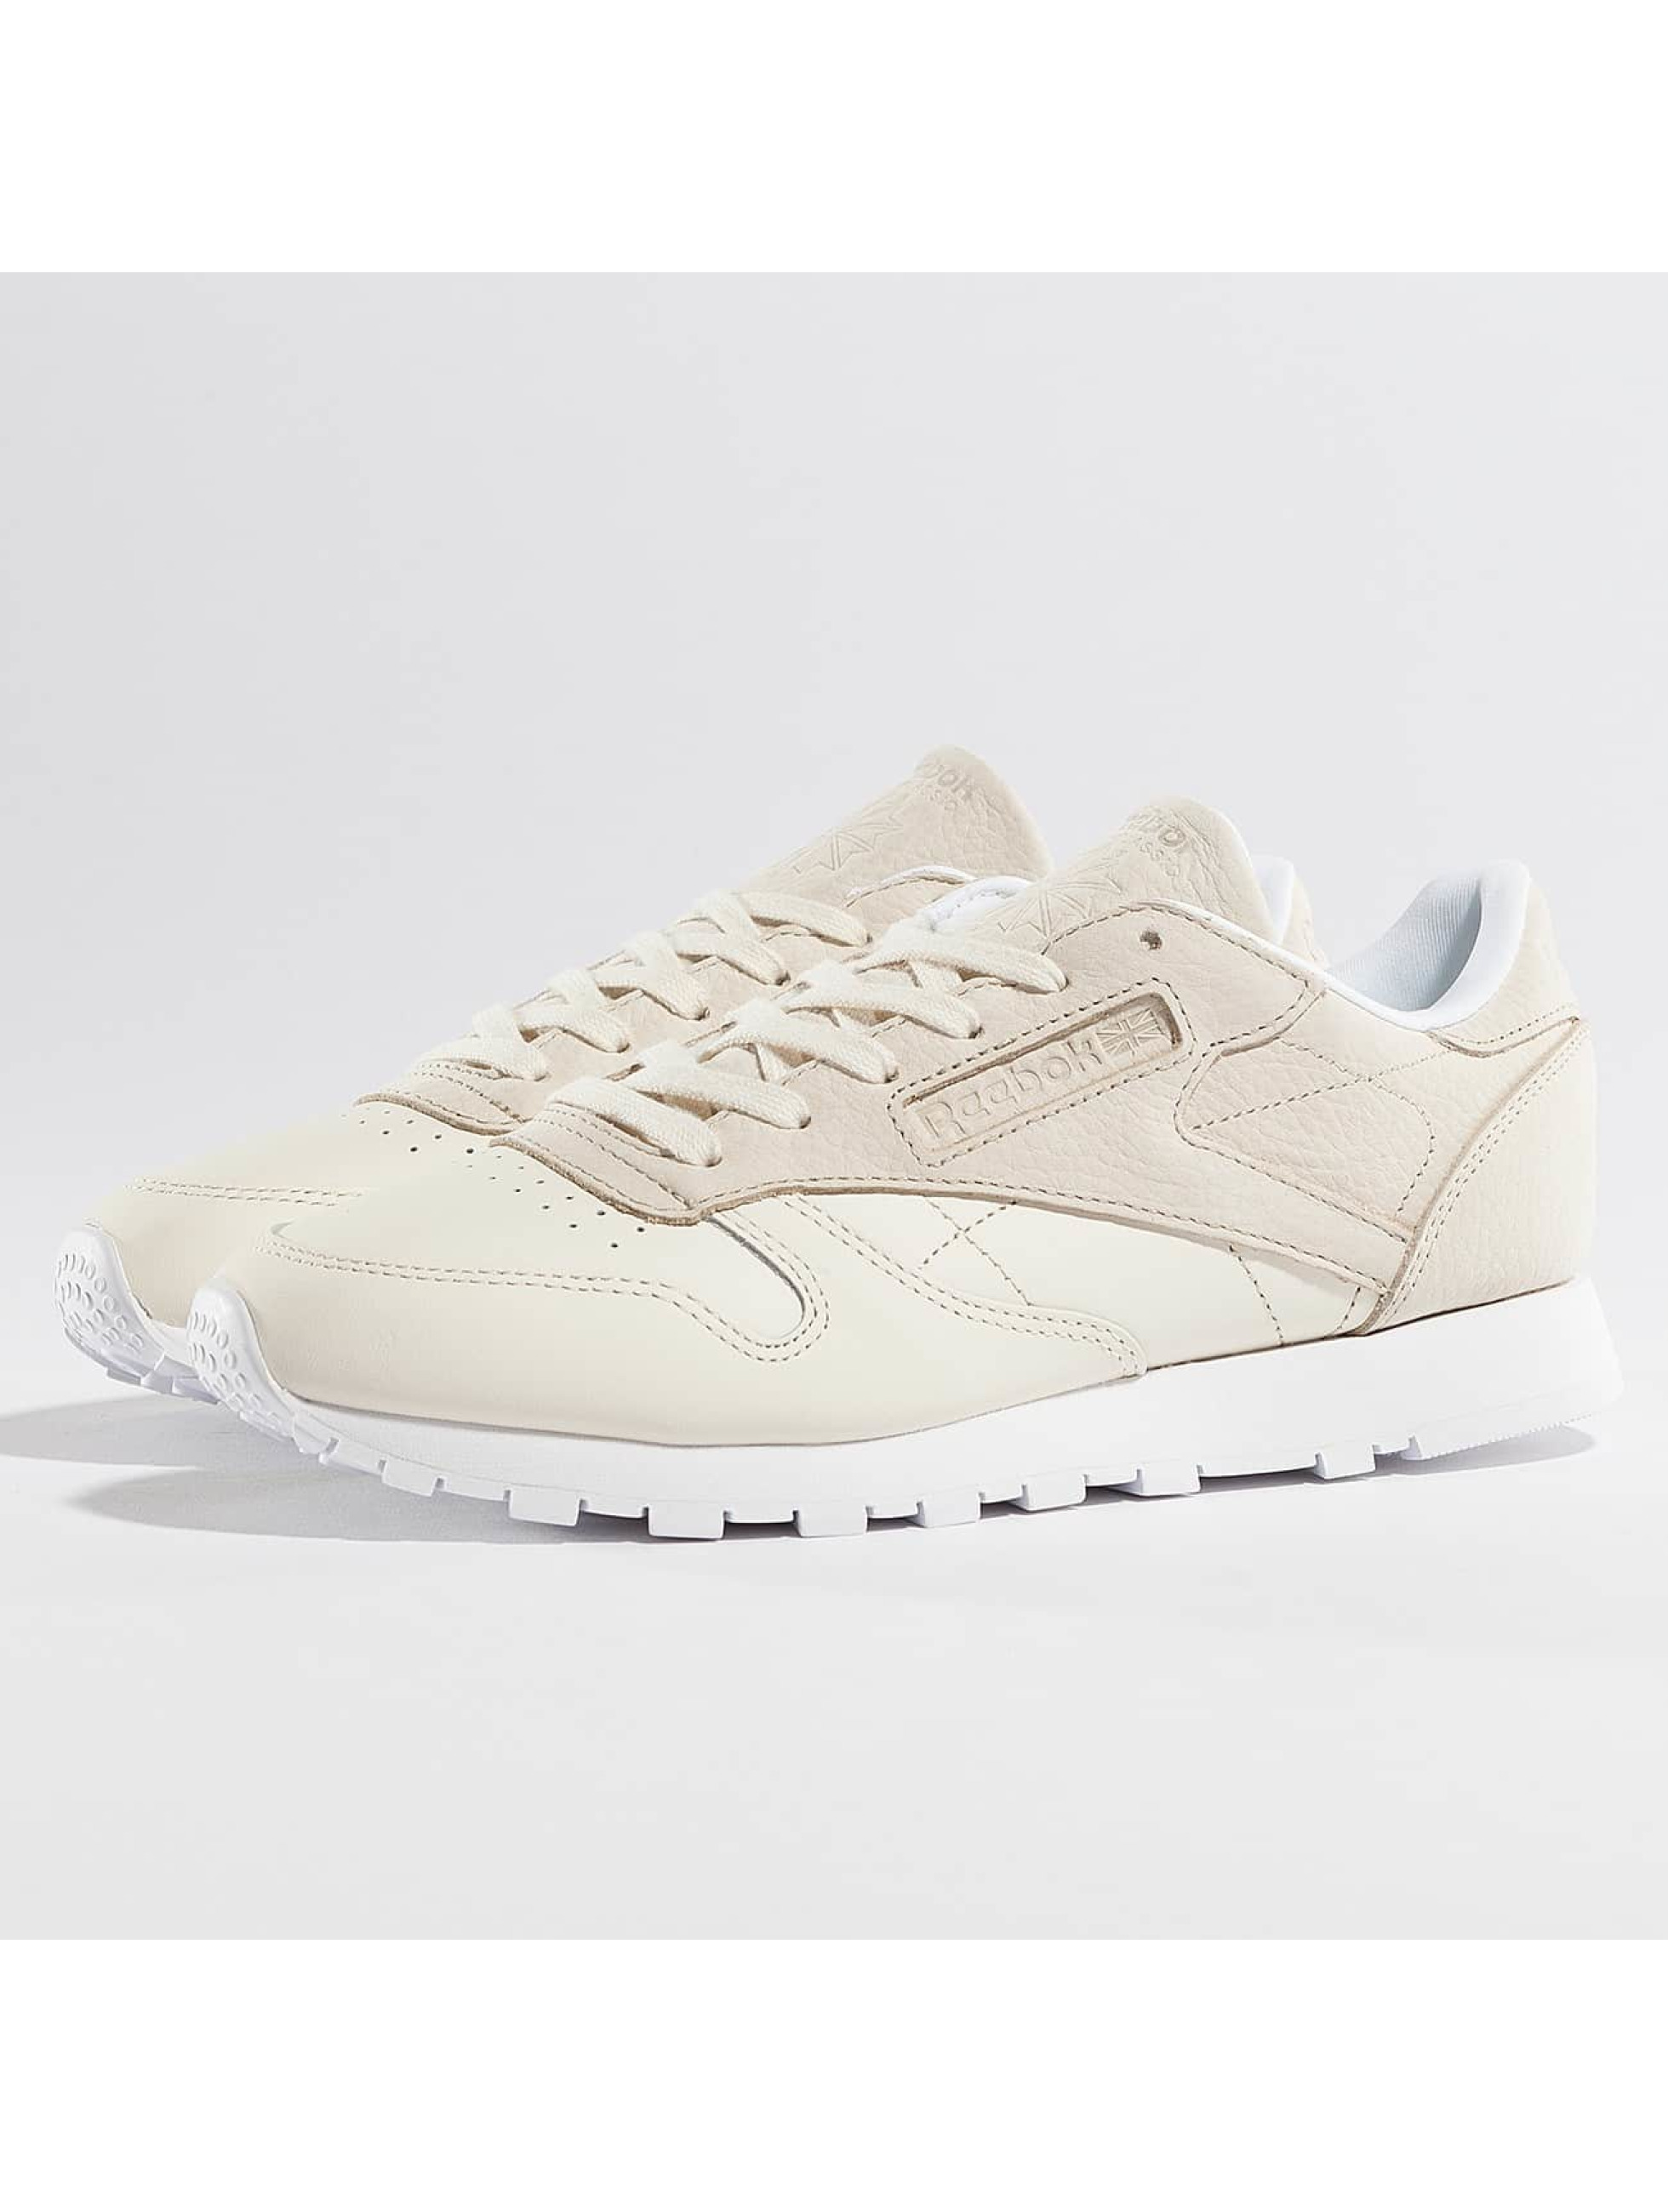 Reebok Chaussures / Baskets Classic Leather Sea You Later en beige